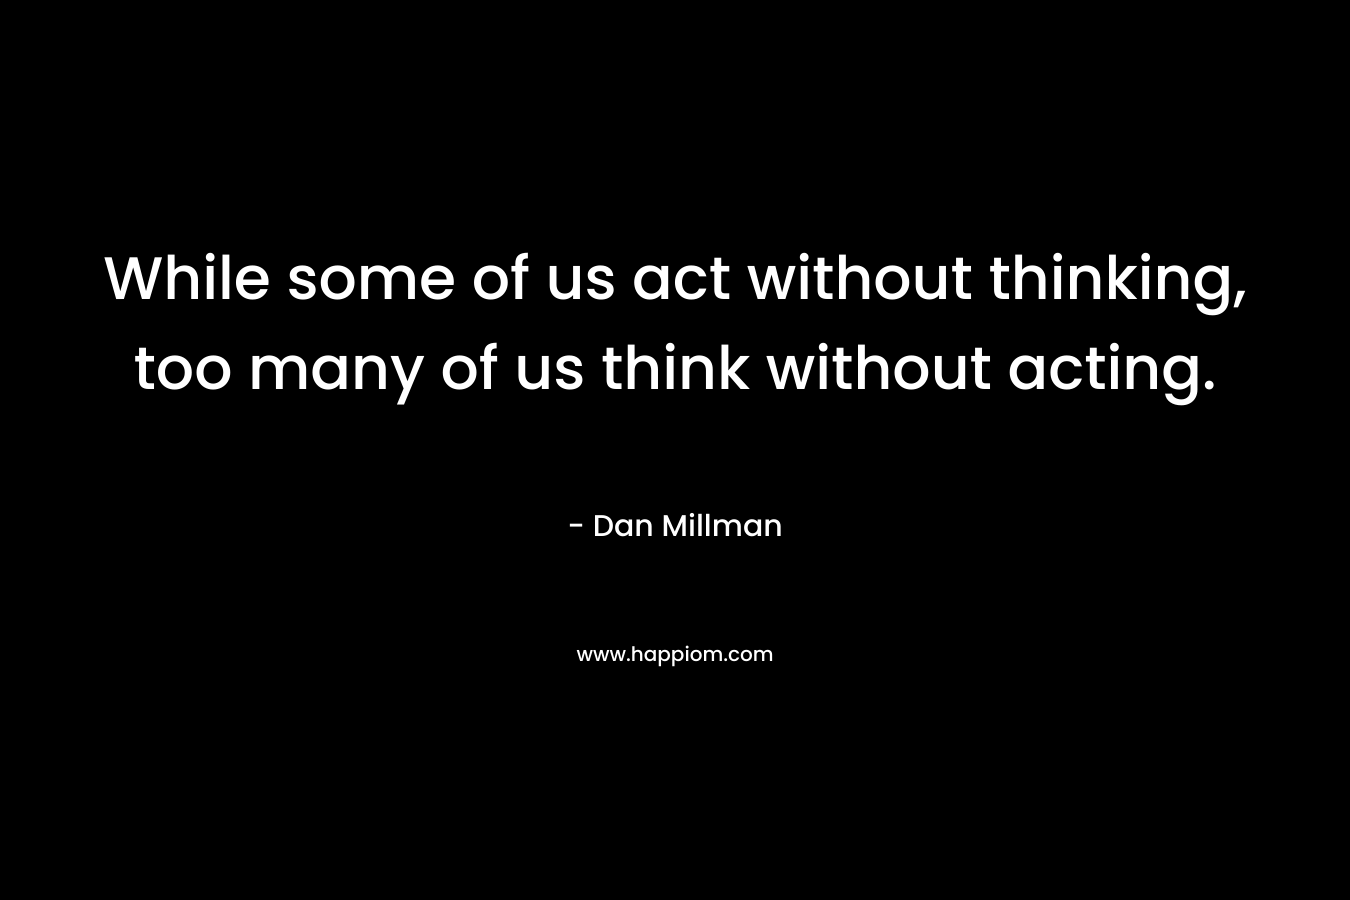 While some of us act without thinking, too many of us think without acting. – Dan Millman